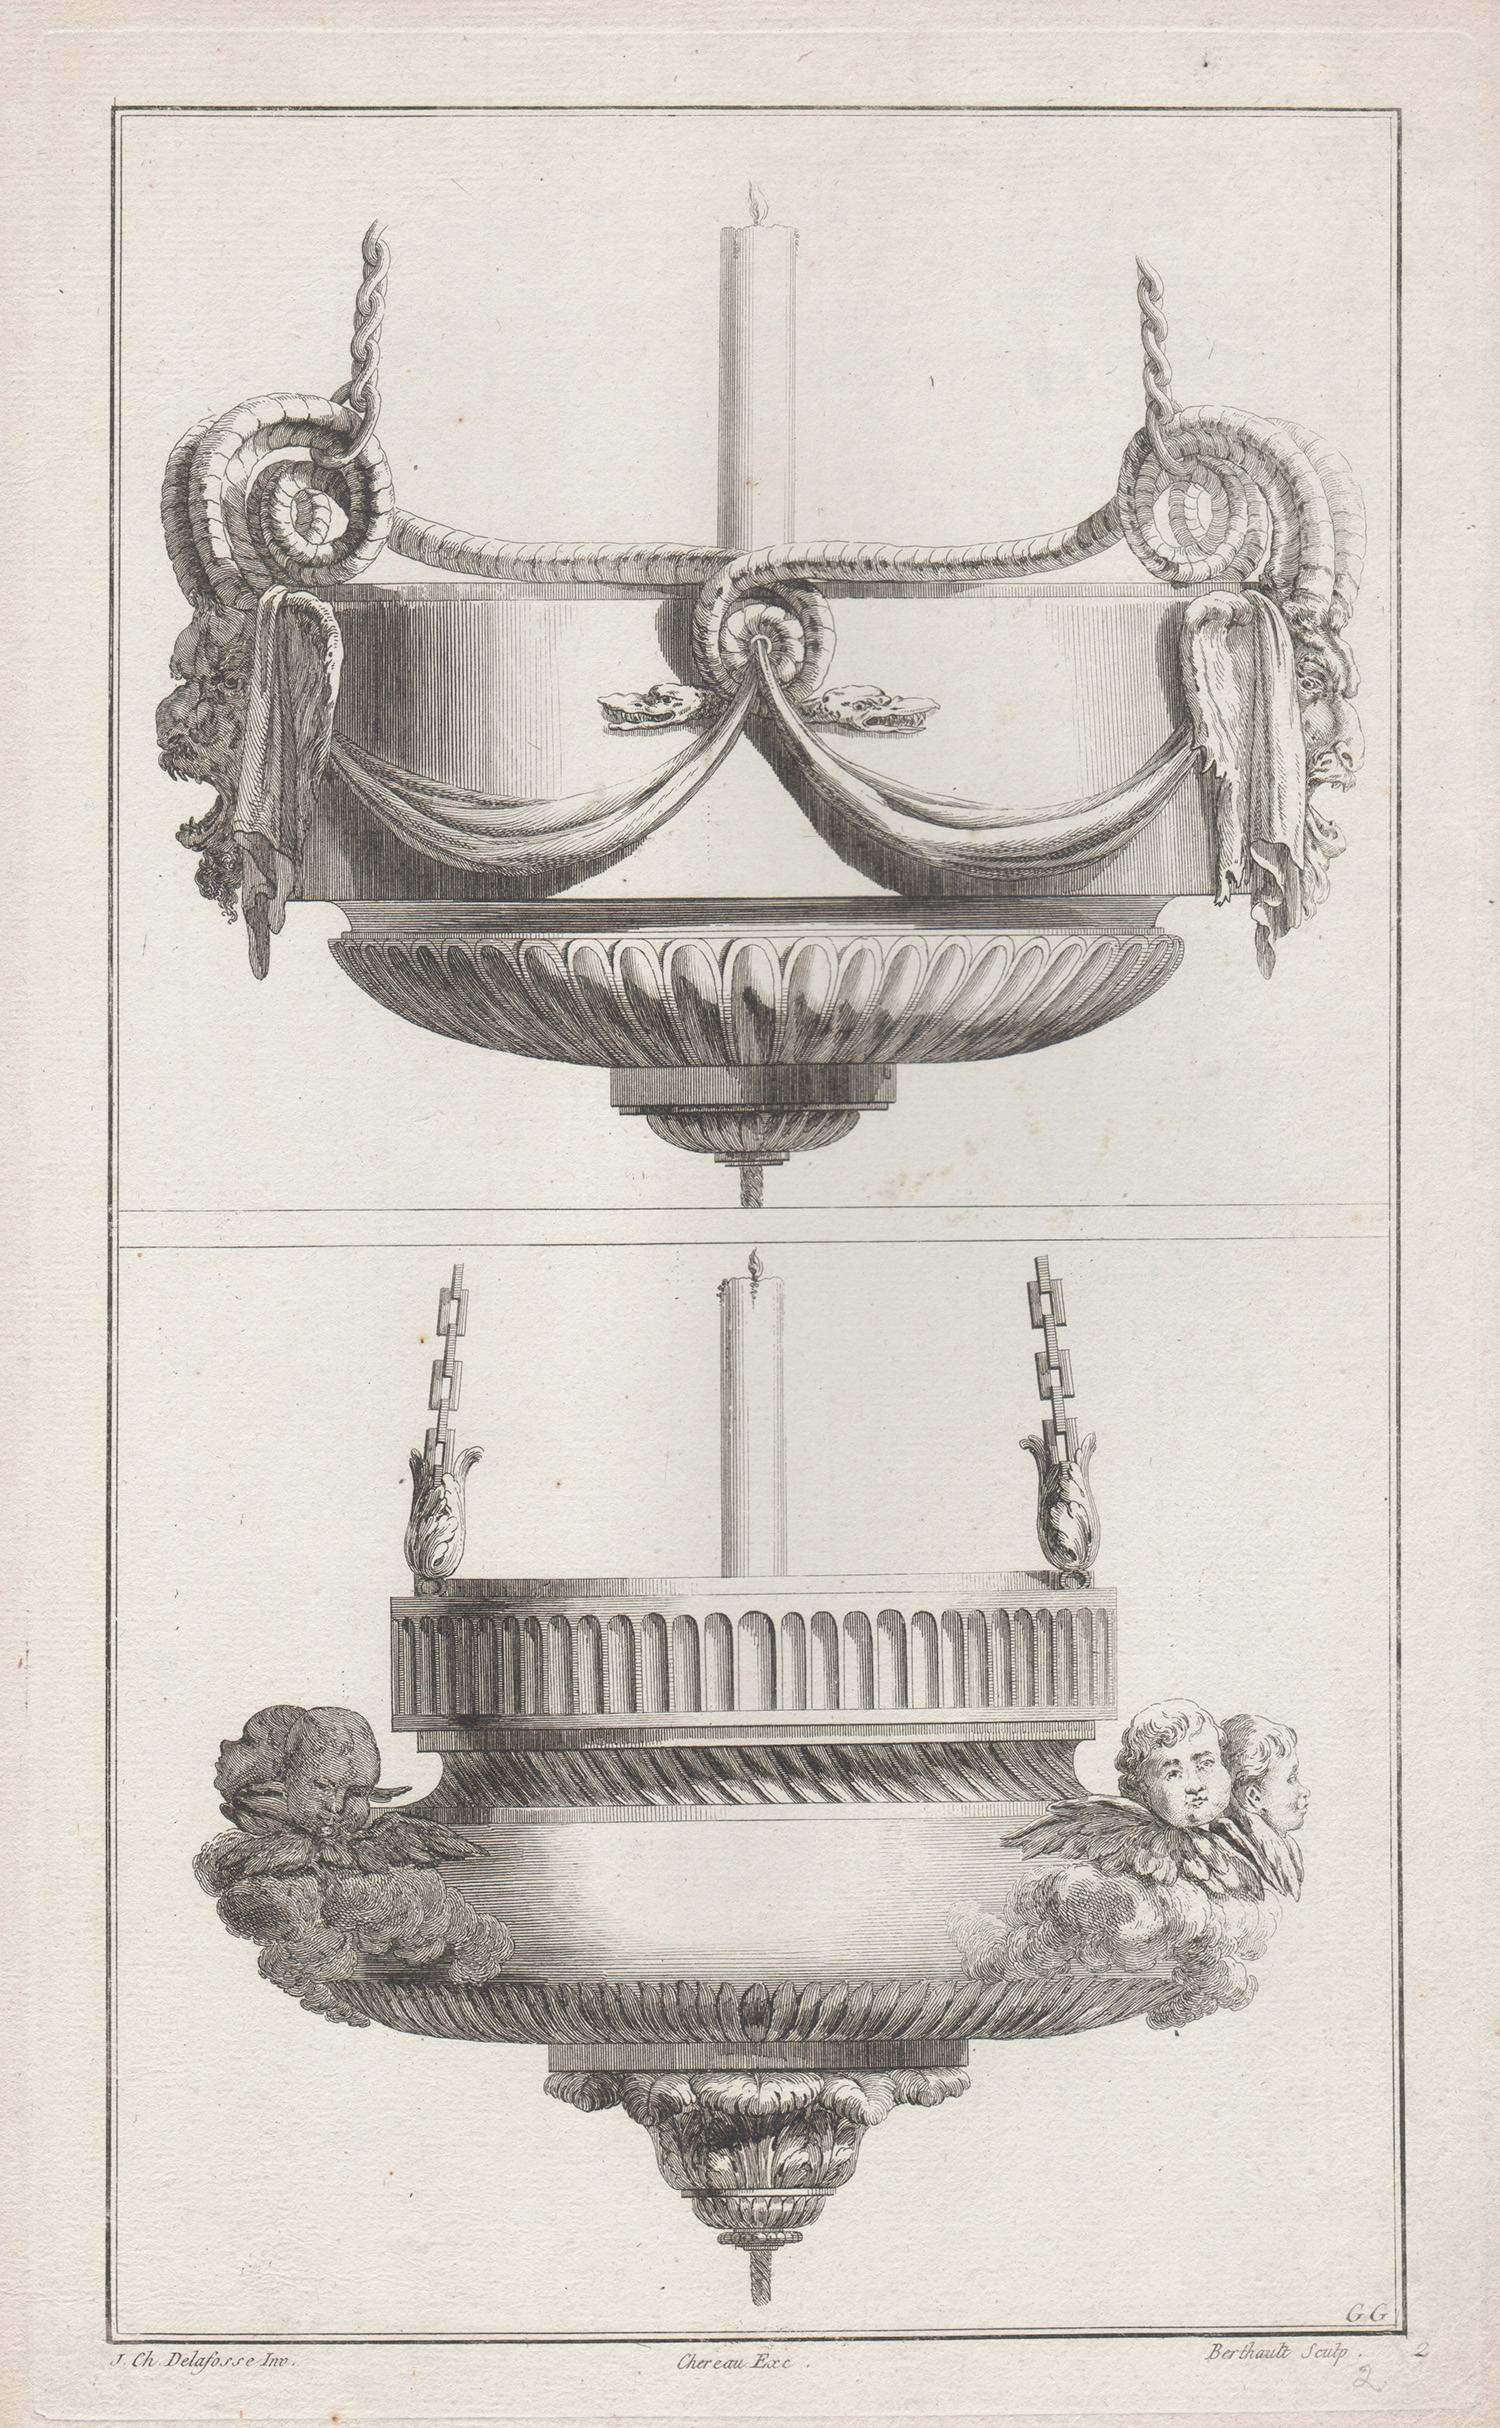 Pierre Gabriel Berthault (1748-1819) after Jean-Charles Delafosse (1734-1791) Interior Print - French Neoclassical Design Engraving for Braziers